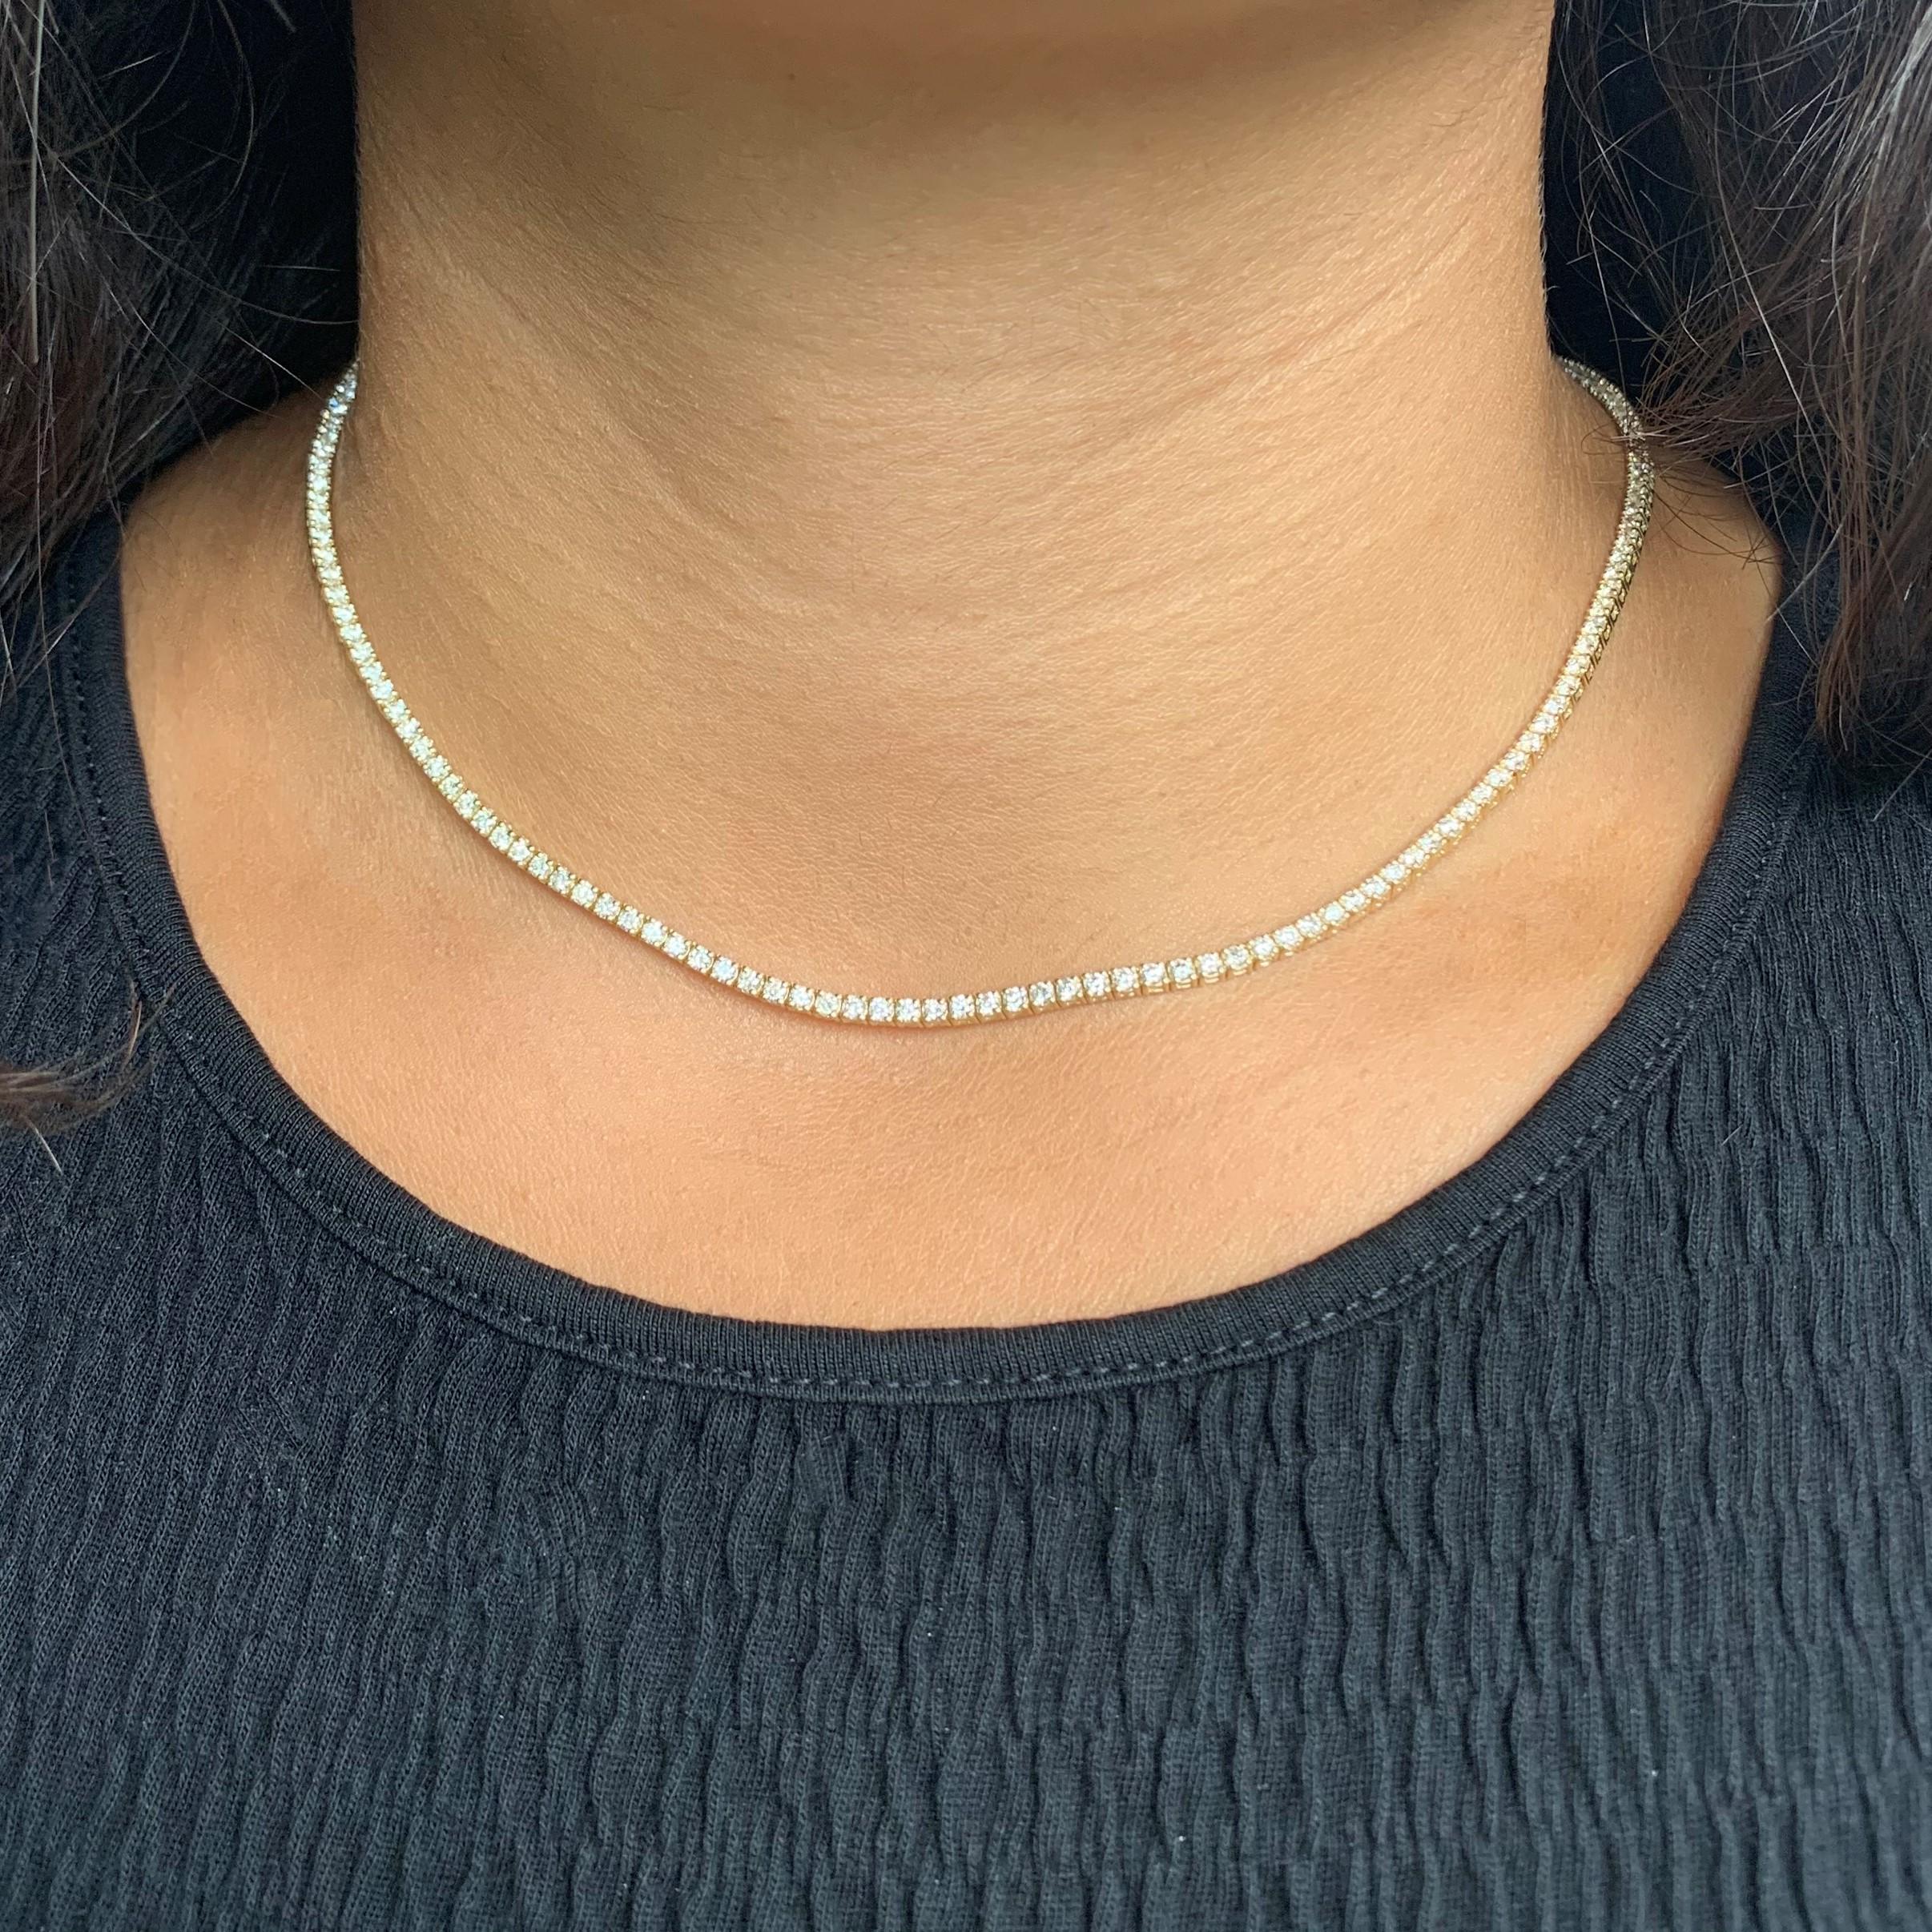 14 Karat White Gold 5.0 Carat Diamond Tennis Necklace In New Condition For Sale In Great neck, NY